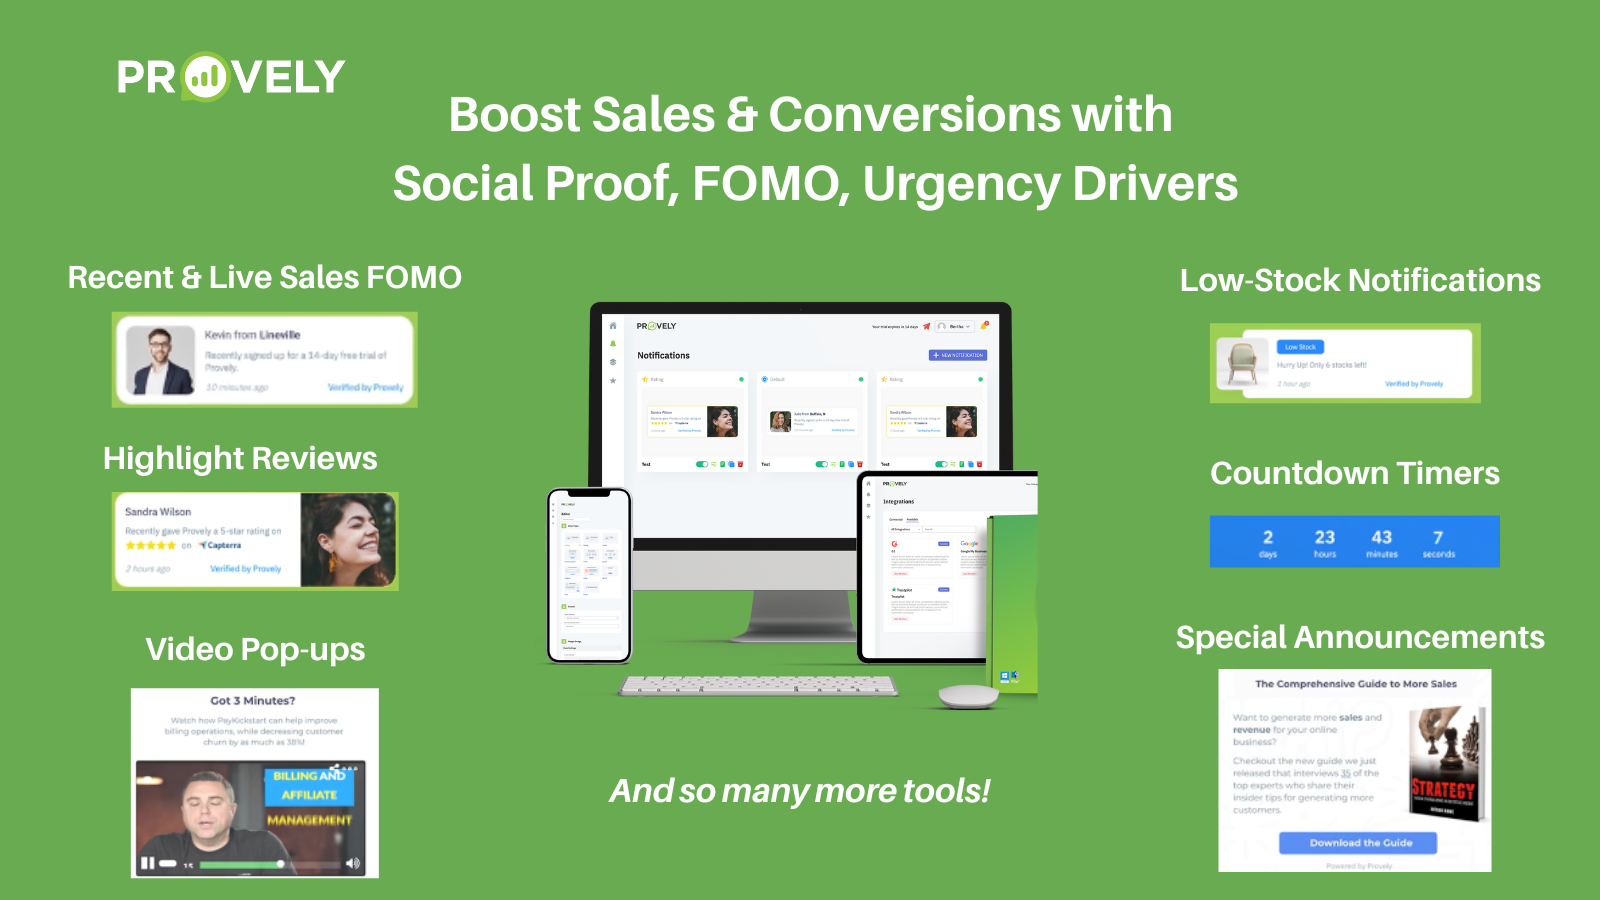 Provely Social Proof and FOMO conversion app